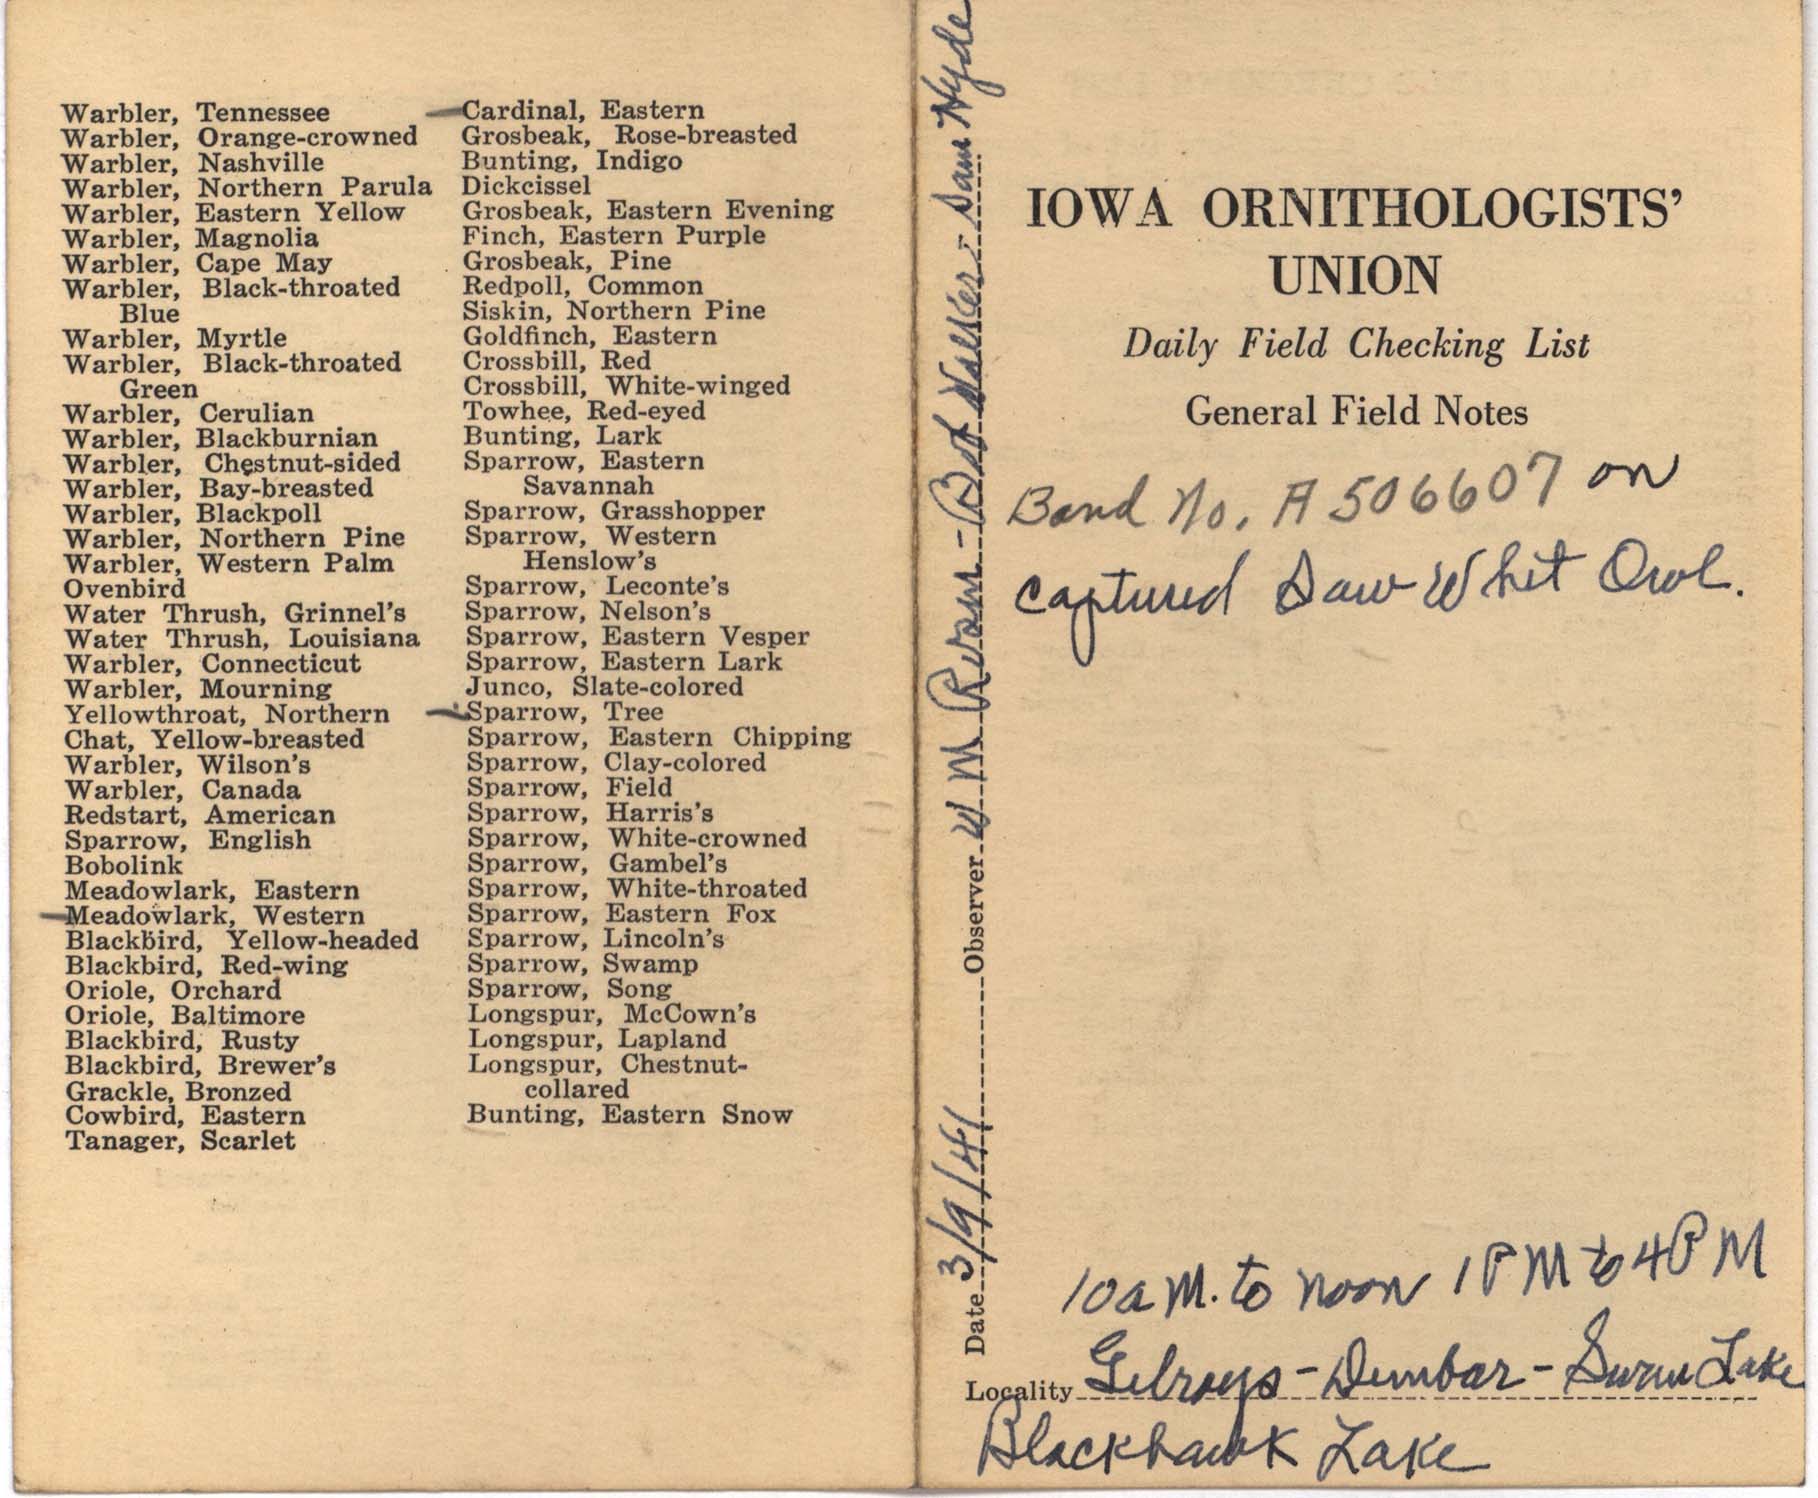 Daily field checking list by Walter Rosene, March 9, 1941